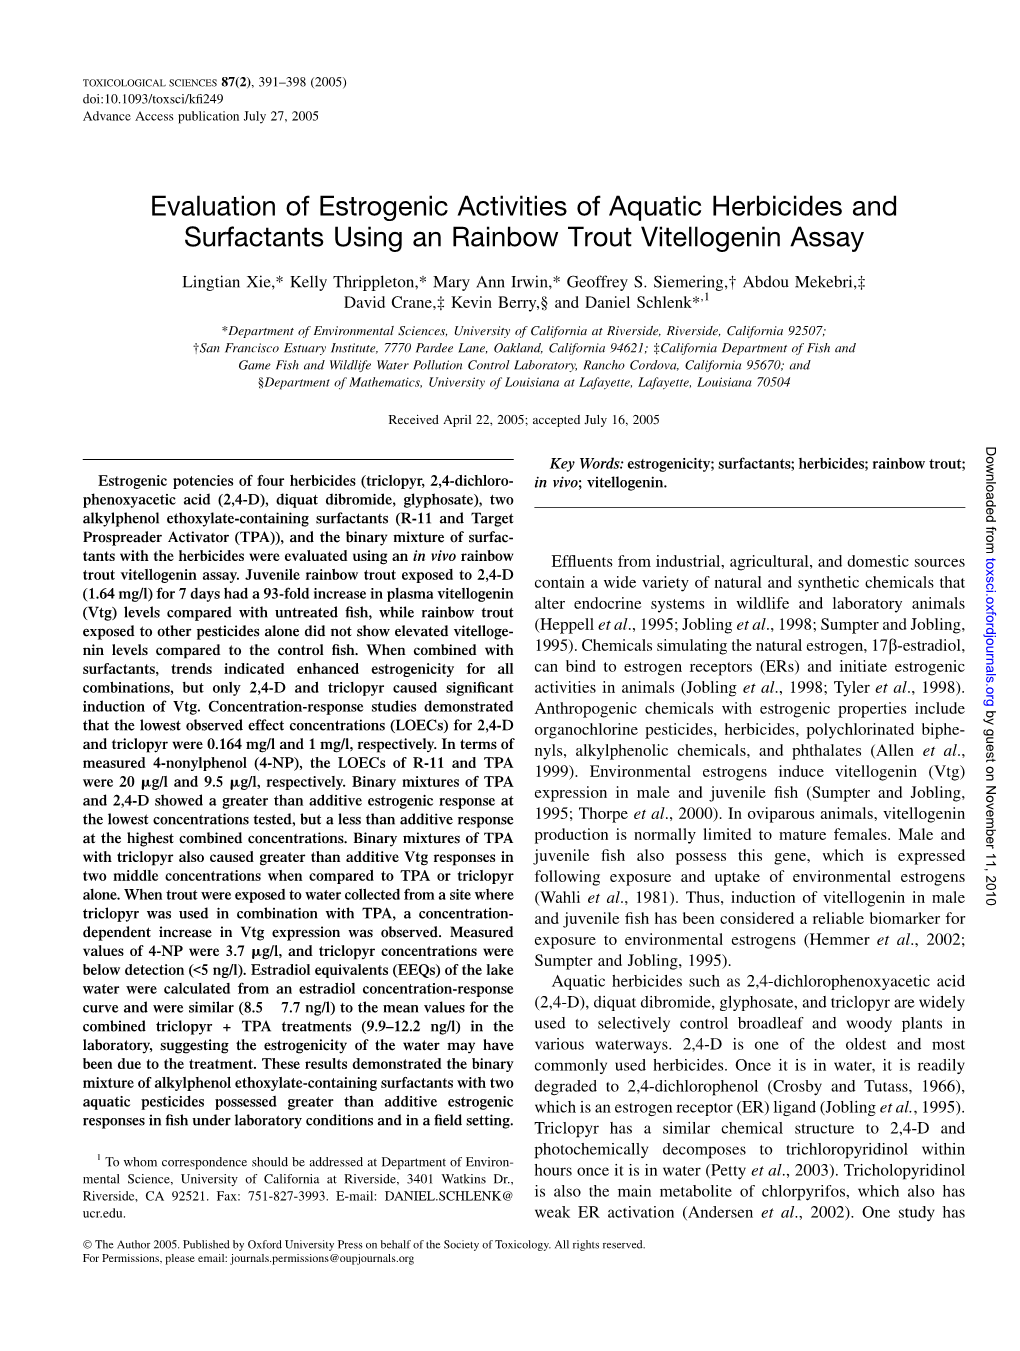 Evaluation of Estrogenic Activities of Aquatic Herbicides and Surfactants Using an Rainbow Trout Vitellogenin Assay